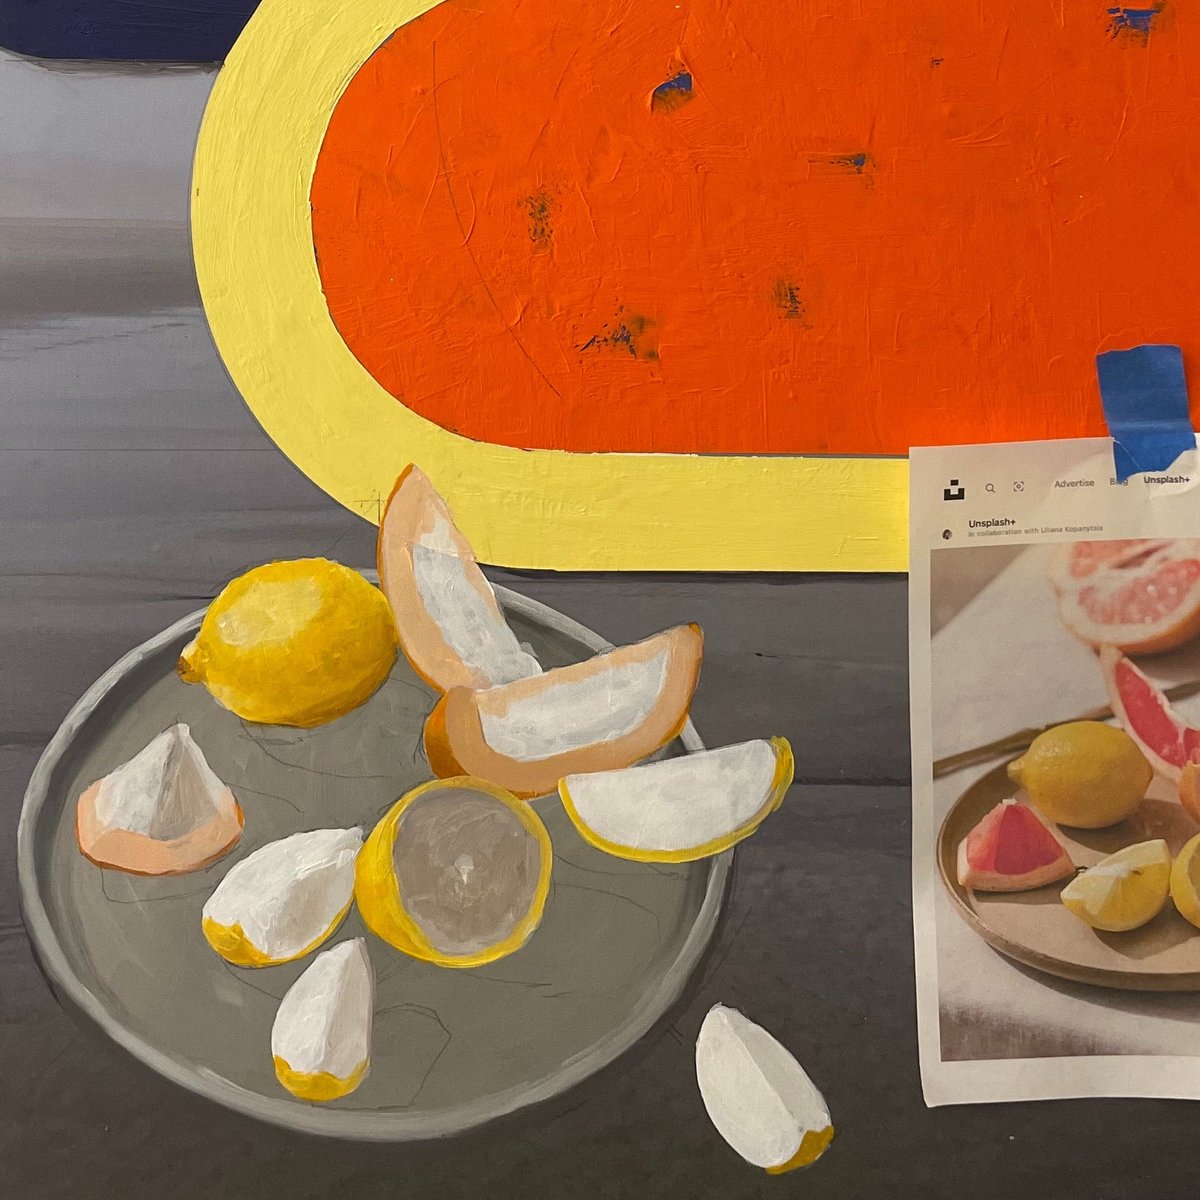 Work-in-progress photo of a painting of plate of citrus, showing under painting and drawing.